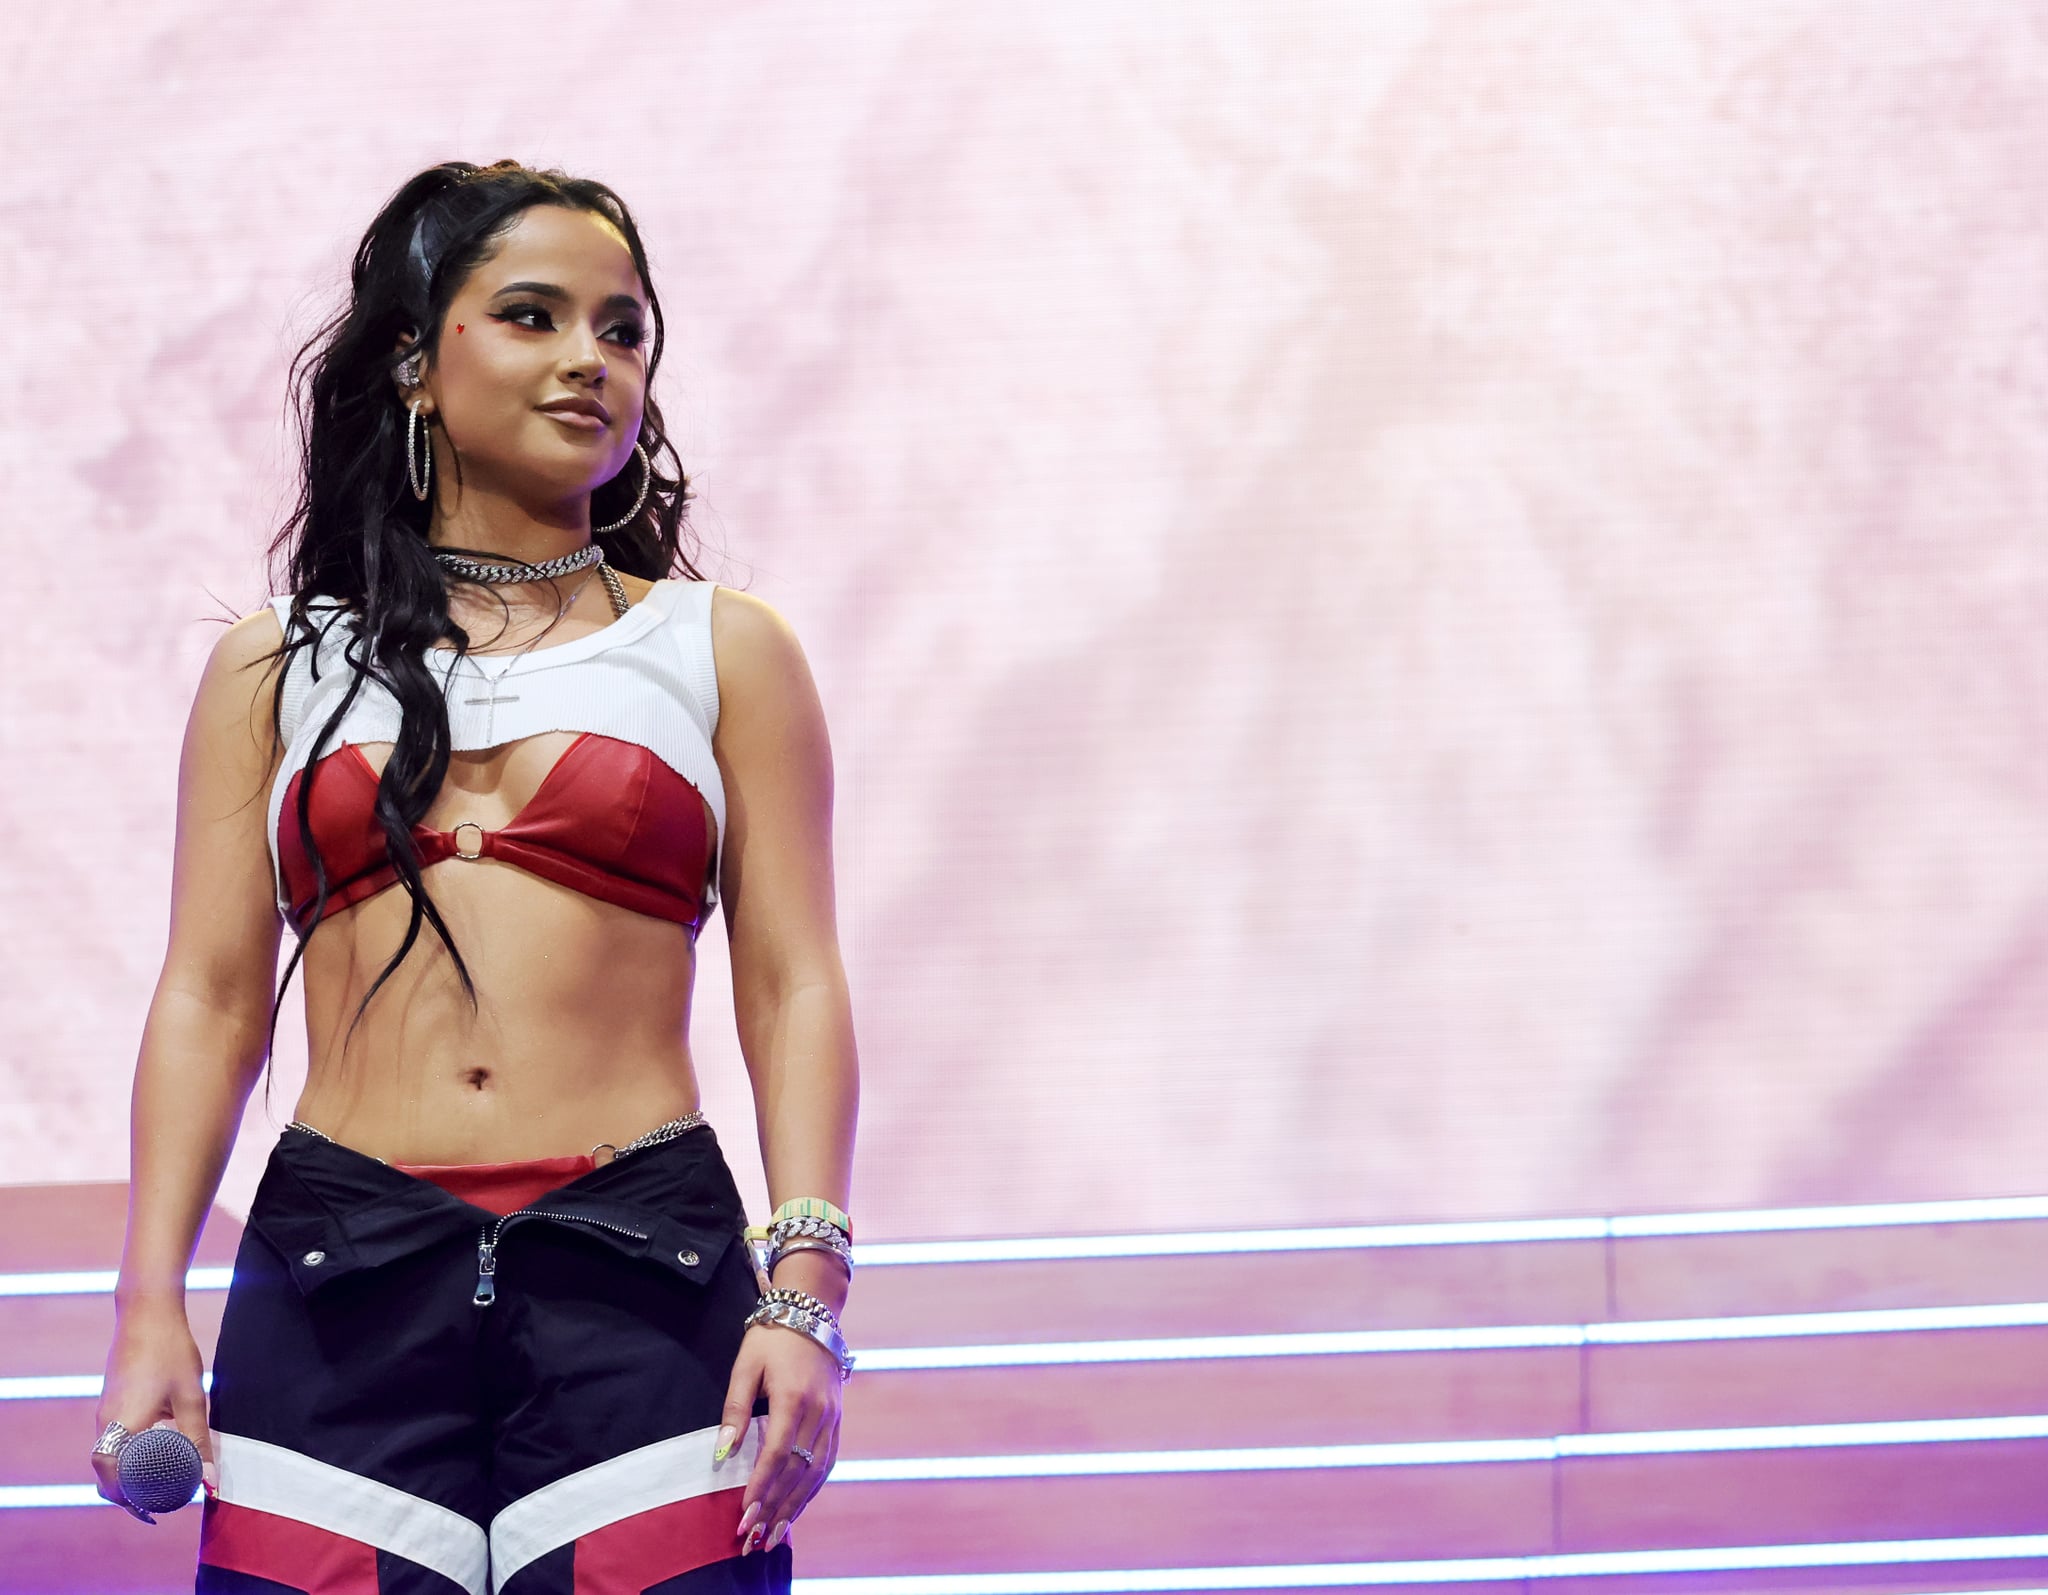 INDIO, CALIFORNIA - APRIL 17: Becky G performs with Karol G onstage at the Coachella Stage during the 2022 Coachella Valley Music And Arts Festival on April 17, 2022 in Indio, California. (Photo by Kevin Winter/Getty Images for Coachella)